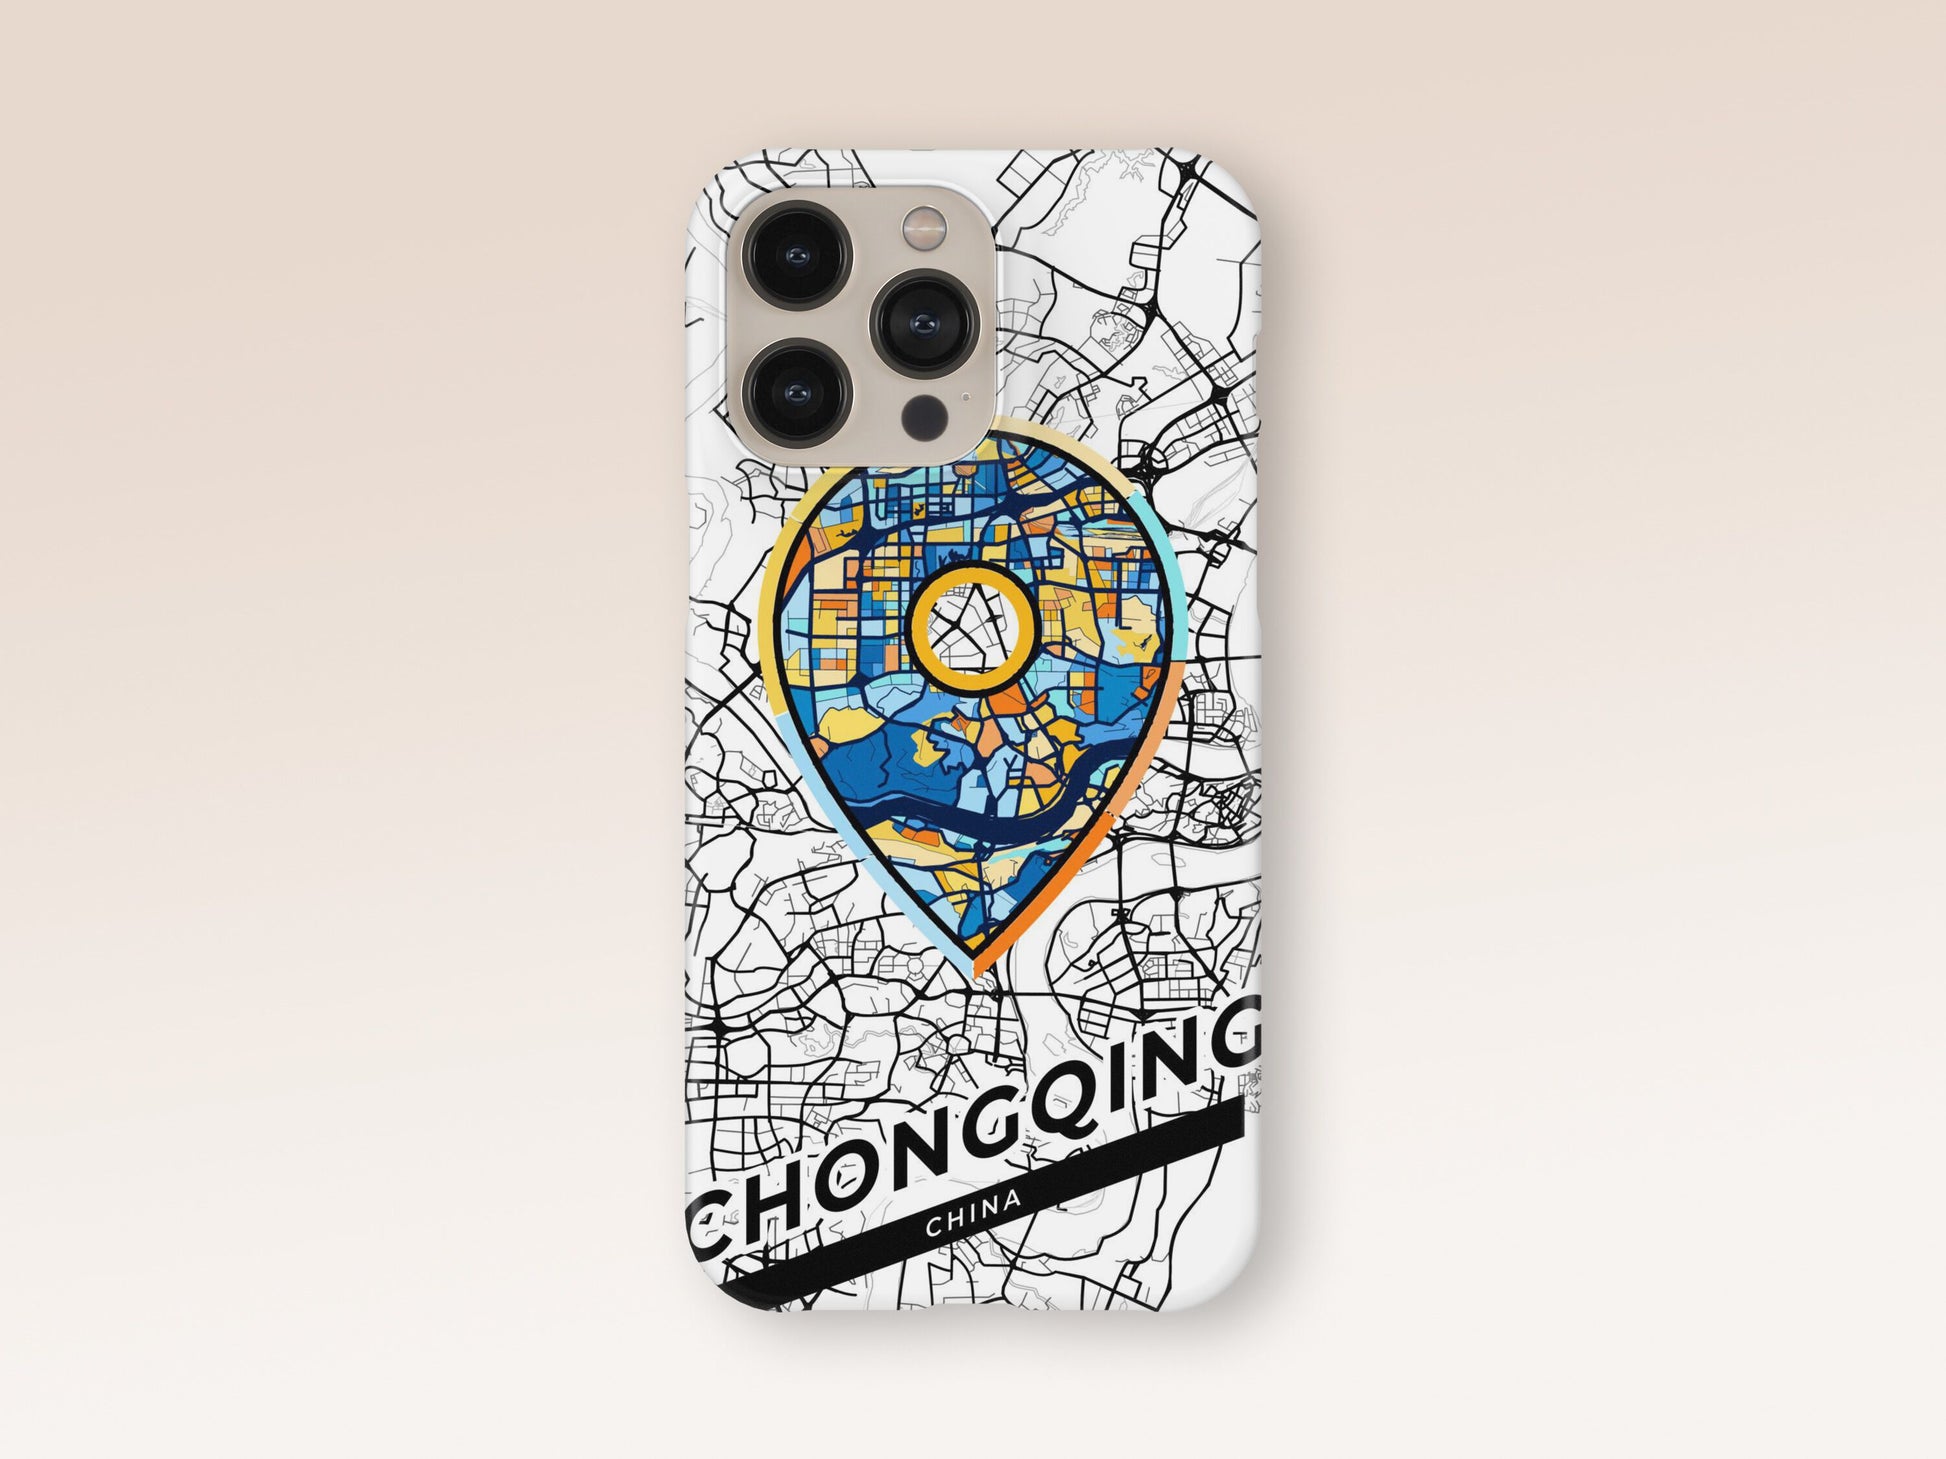 Chongqing China slim phone case with colorful icon. Birthday, wedding or housewarming gift. Couple match cases. 1